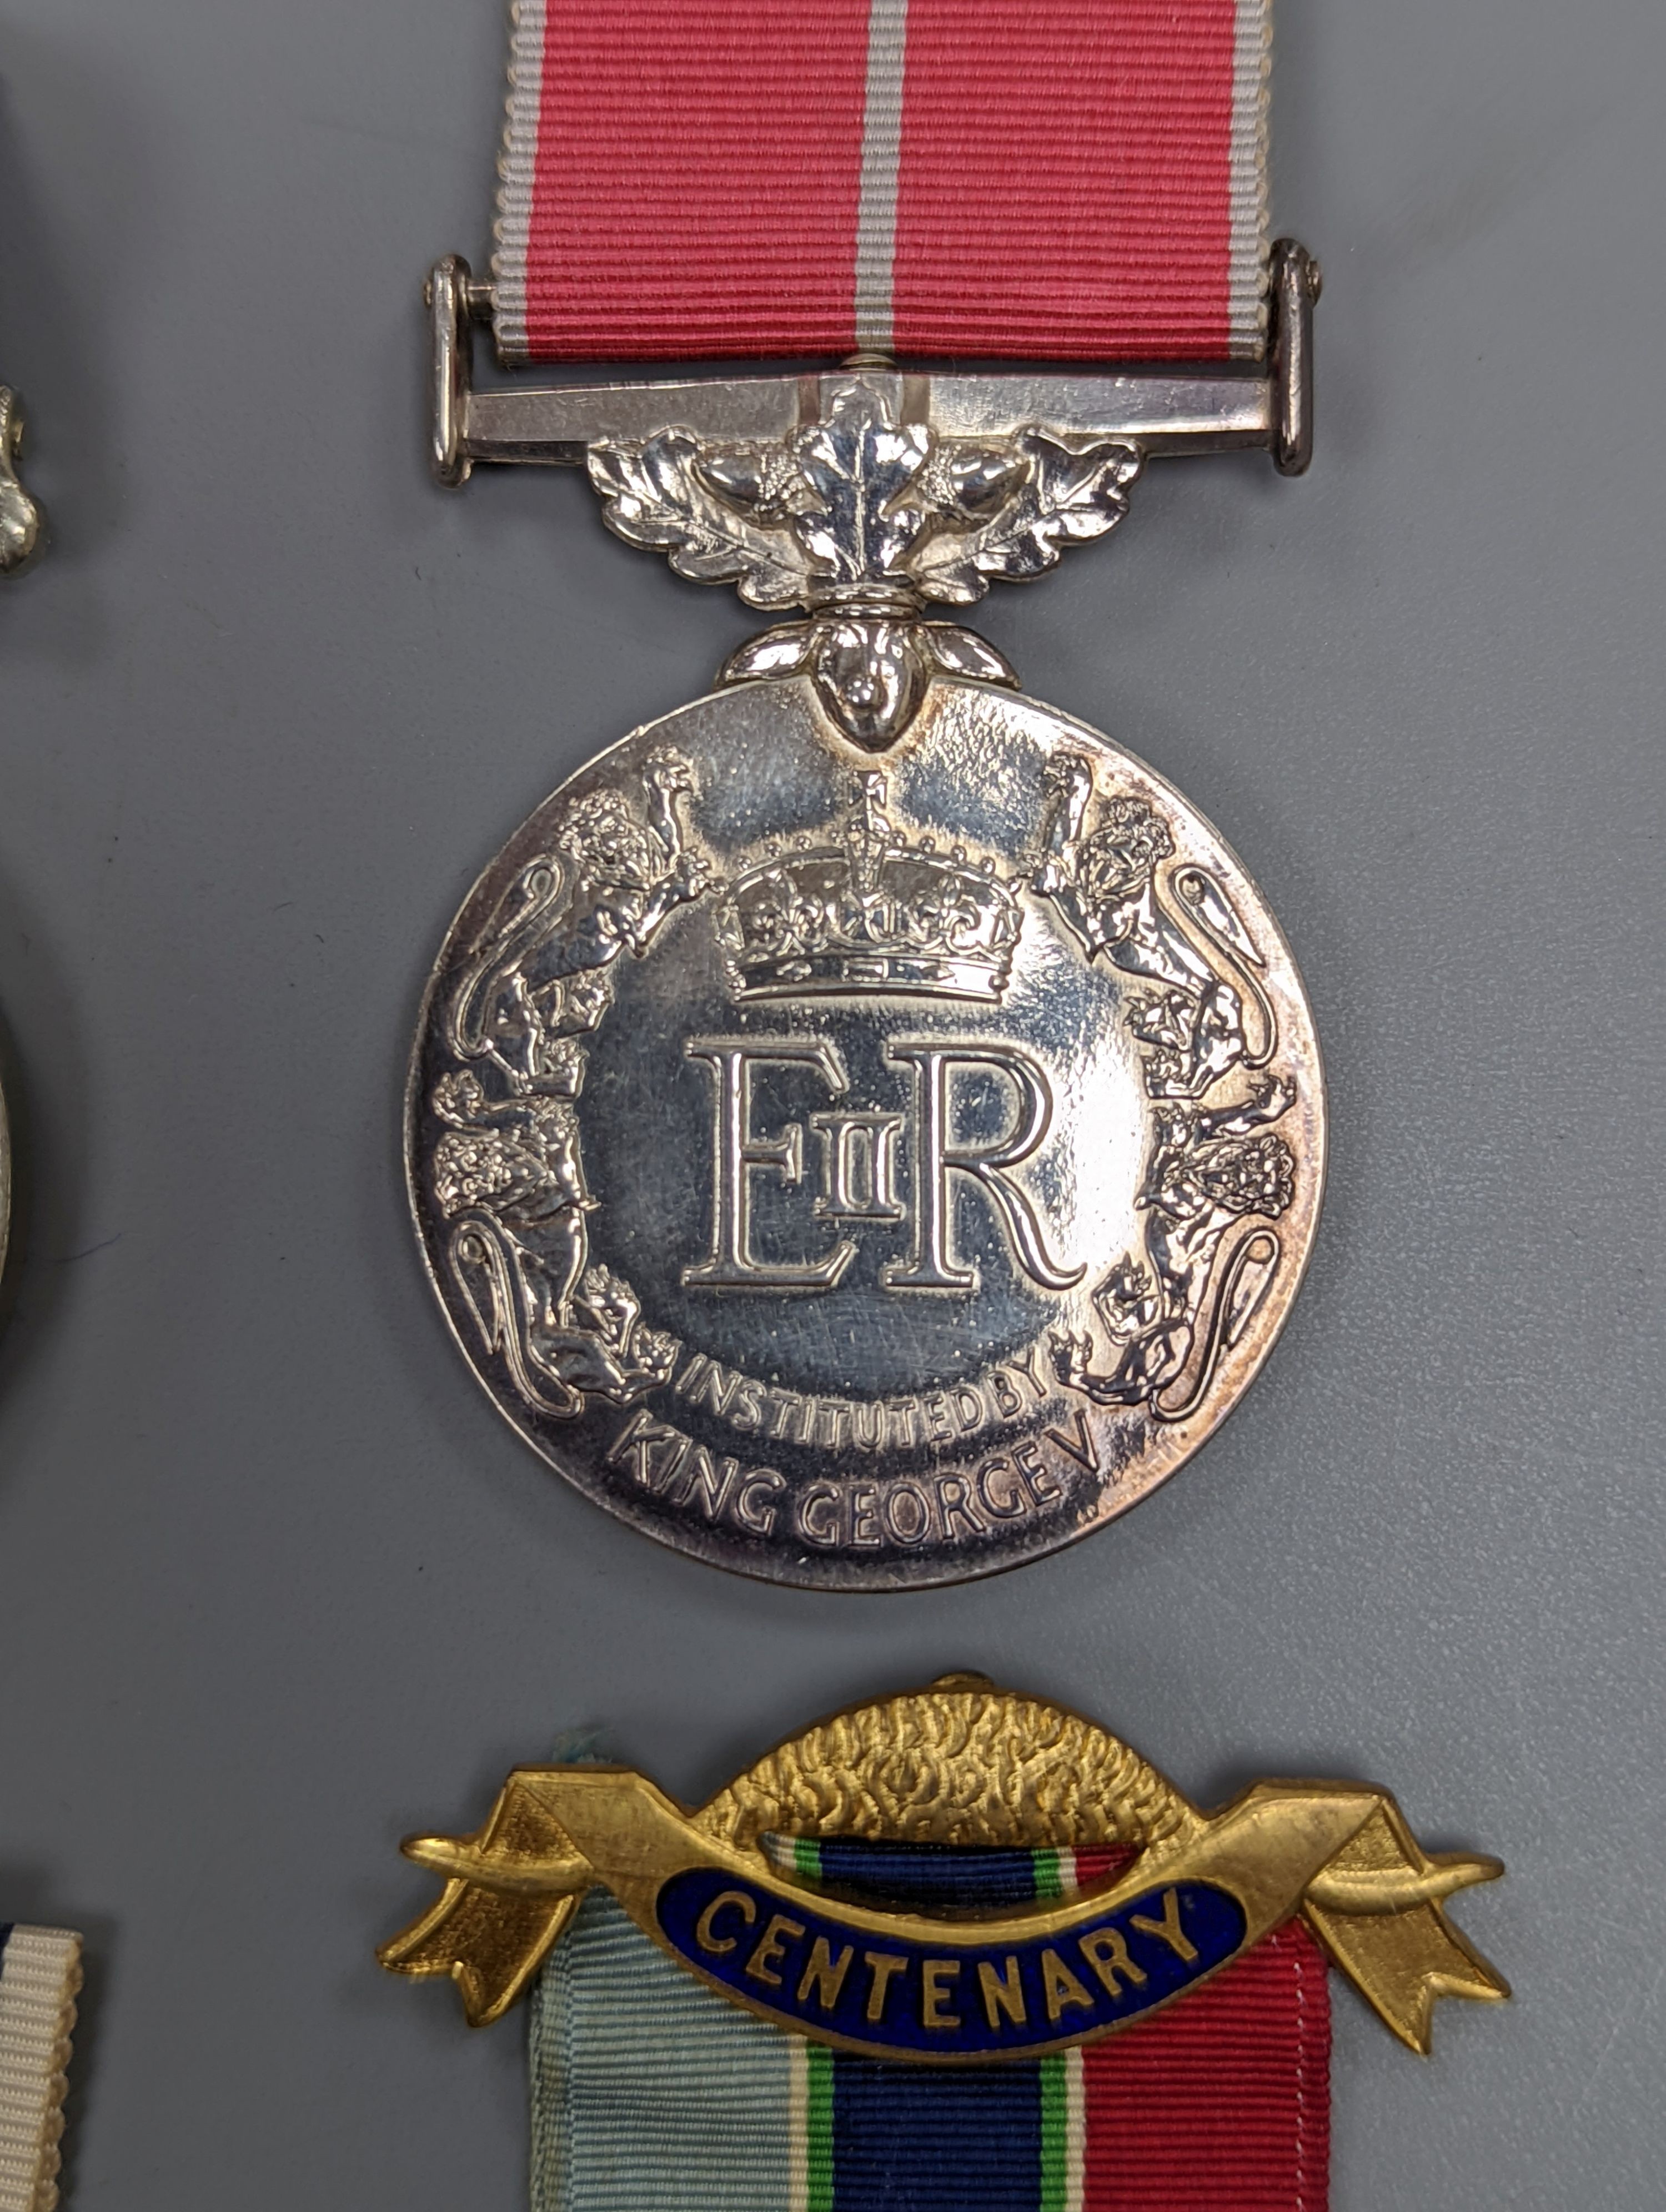 WW2 Australia Service medal and war medal, QEII Order of the British Empire medal, RAF for long service and good conduct medal, and two other medals